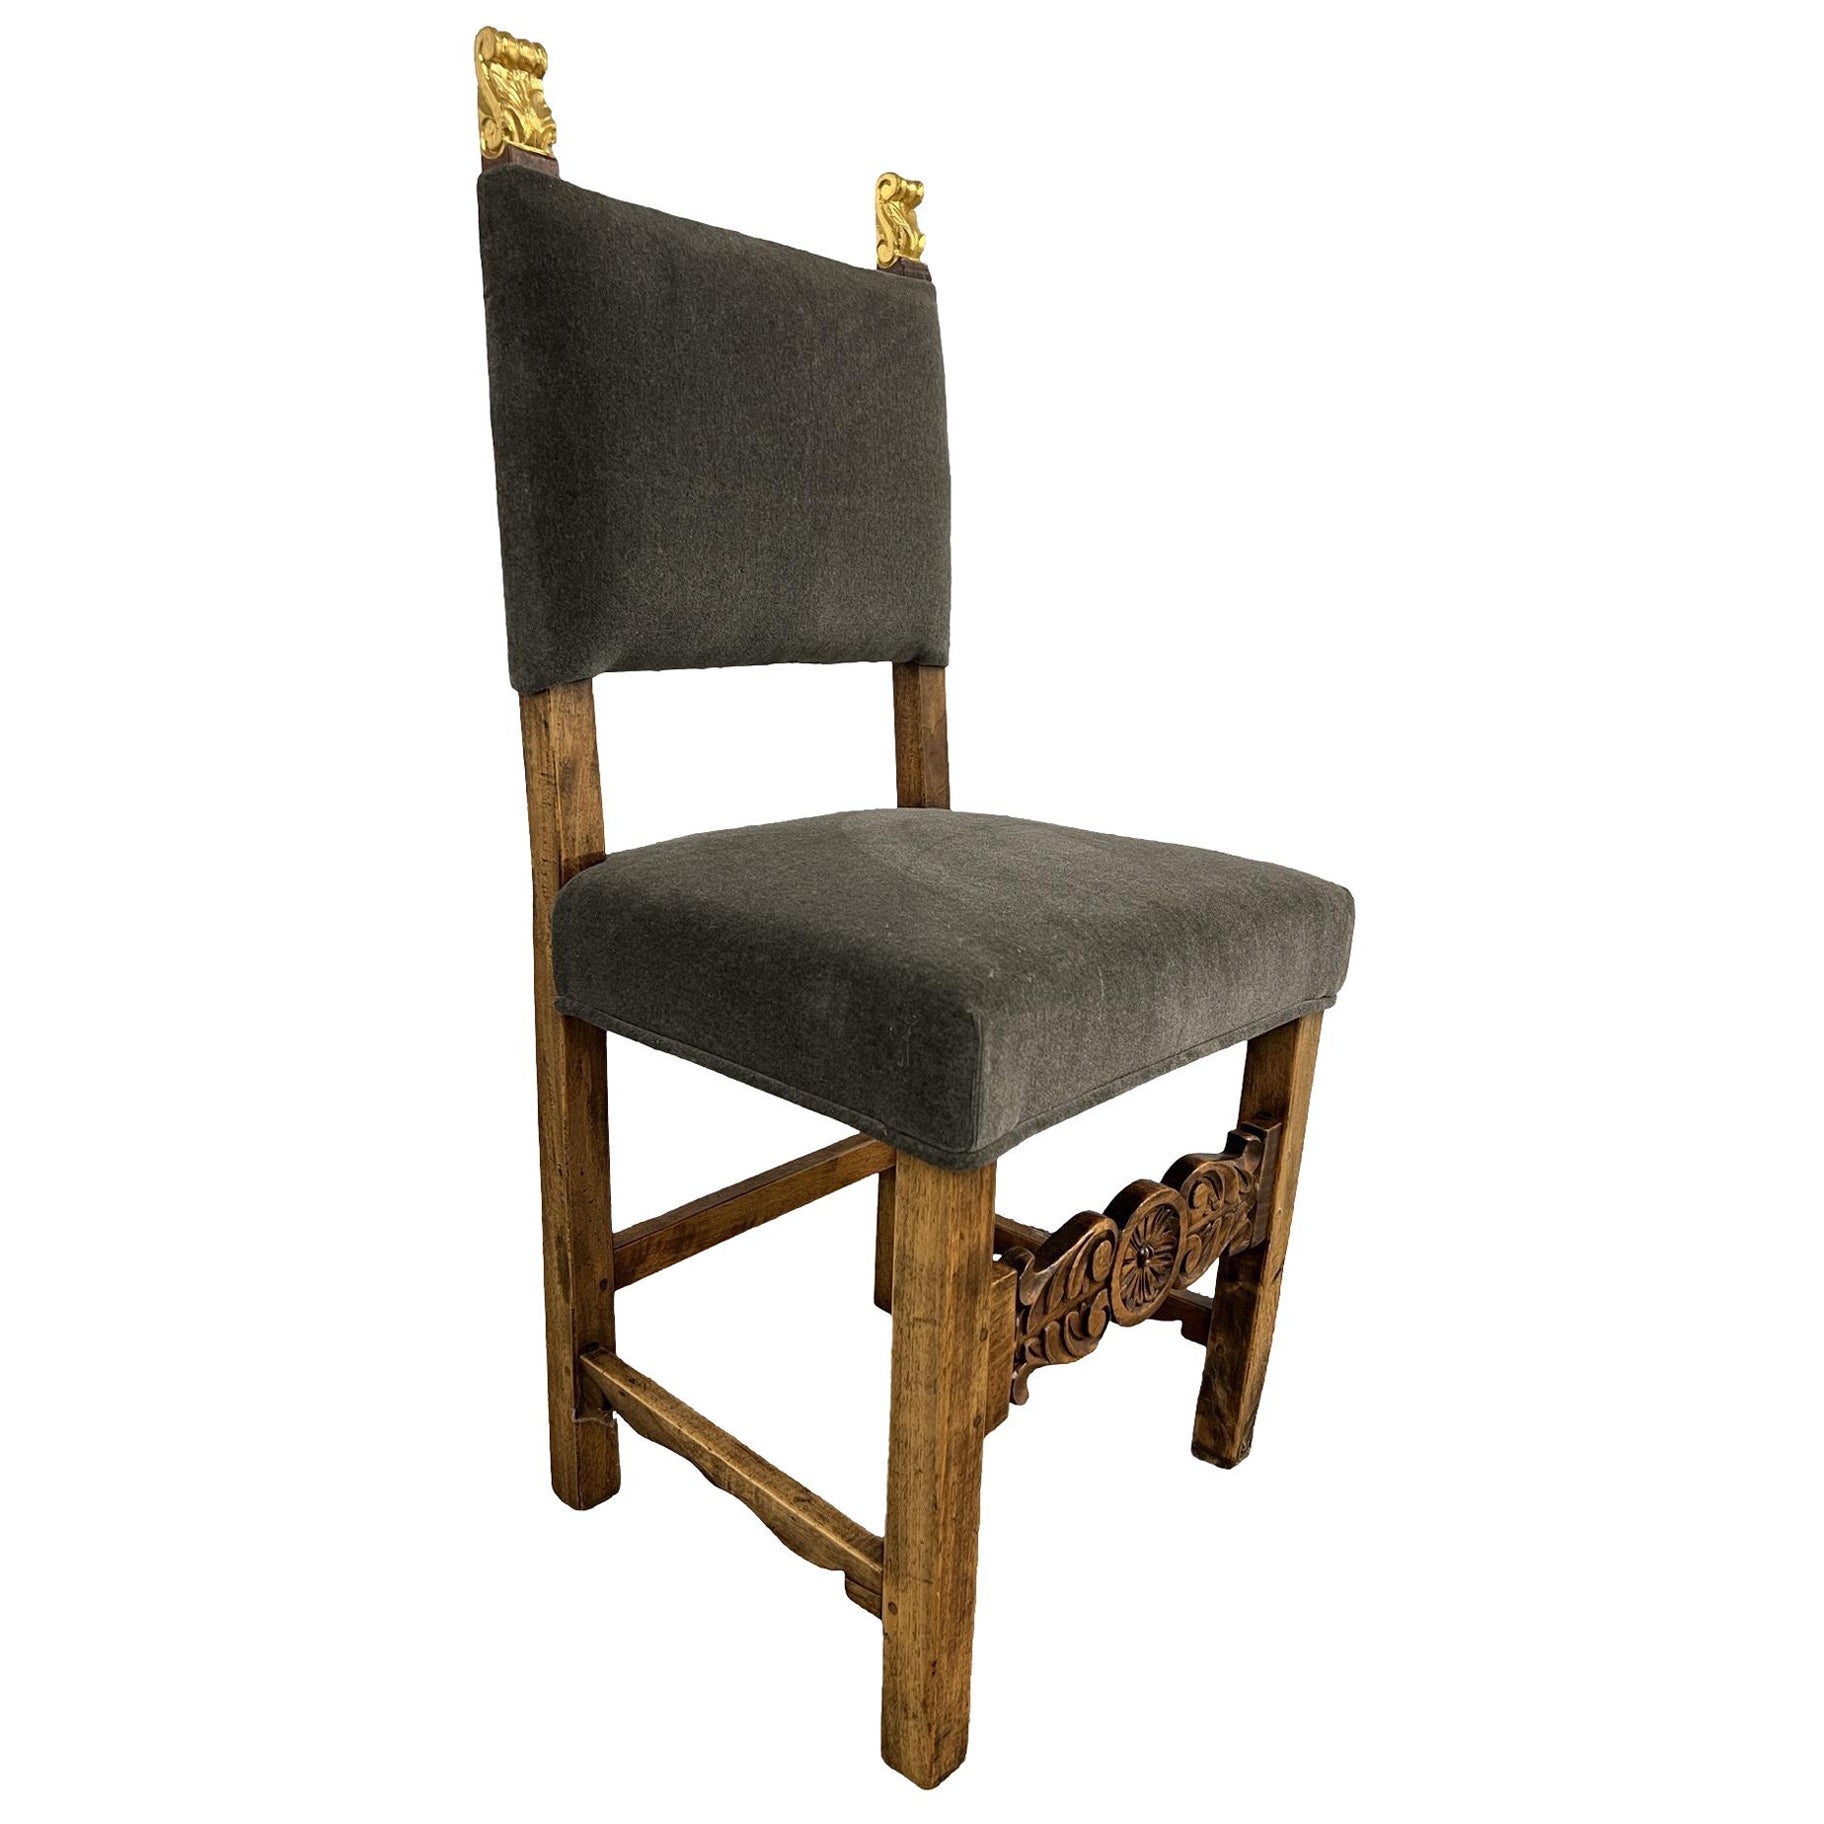 19th Century Spanish Baroque Giltwood & Mohair Upholstered Side Chair For Sale